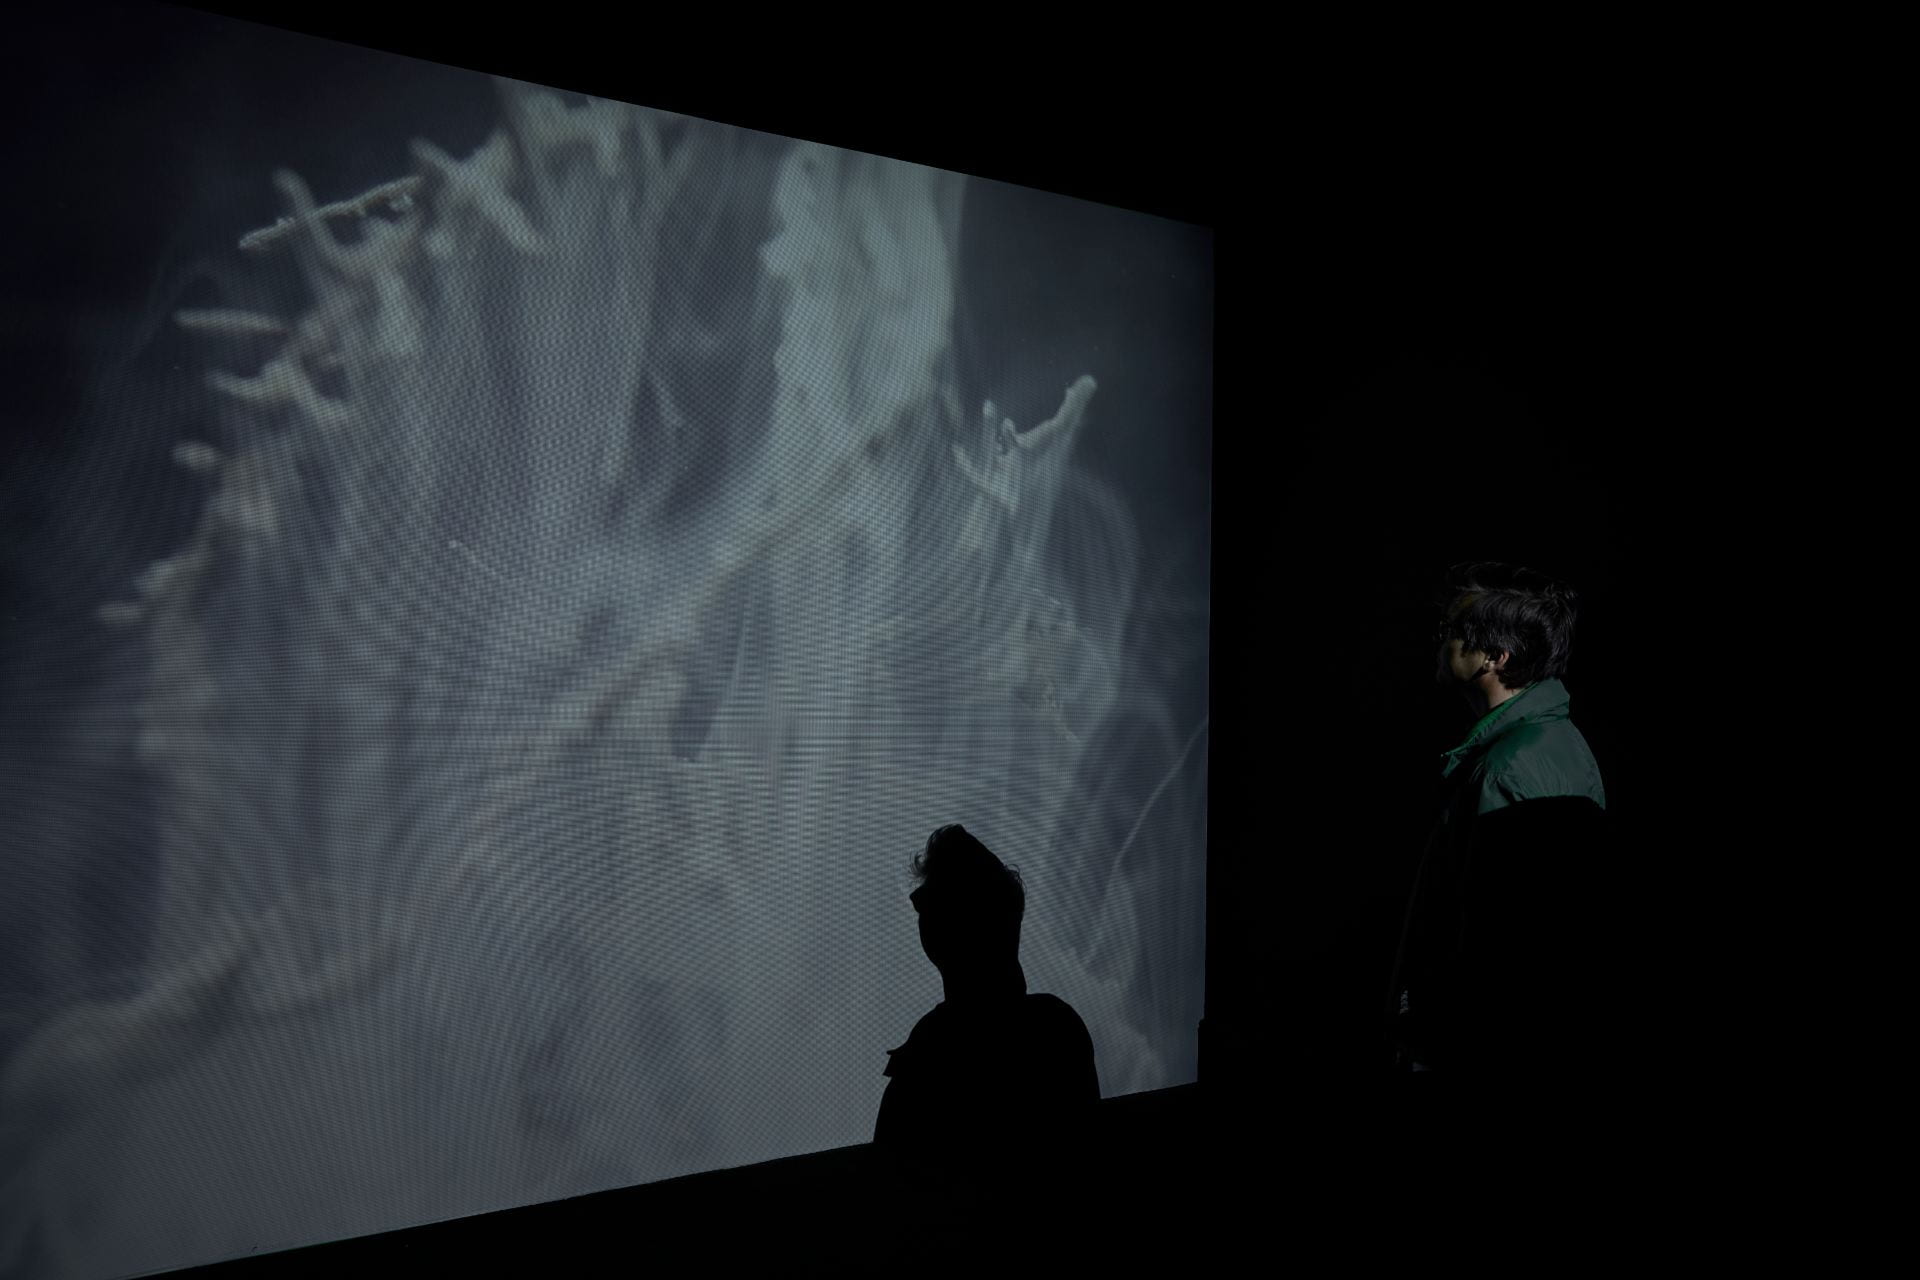 A person's silhouette is visible against a projected film screen. The screen shows ghostly towering abstract shapes in water.